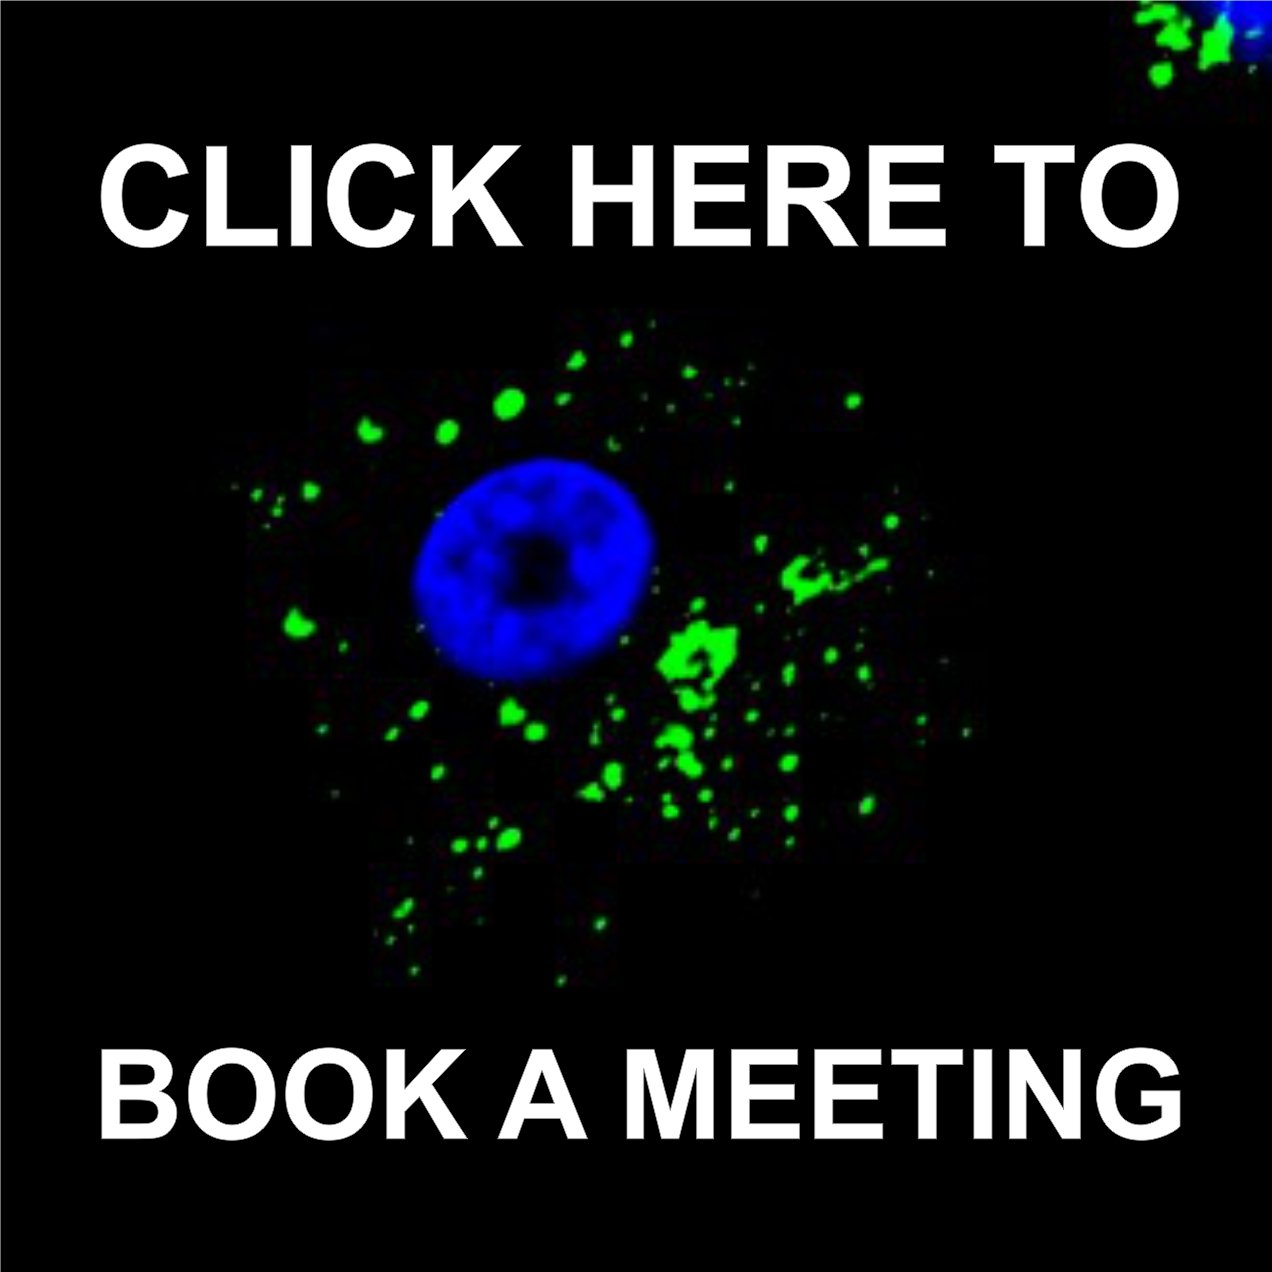 Click here to book a meeting